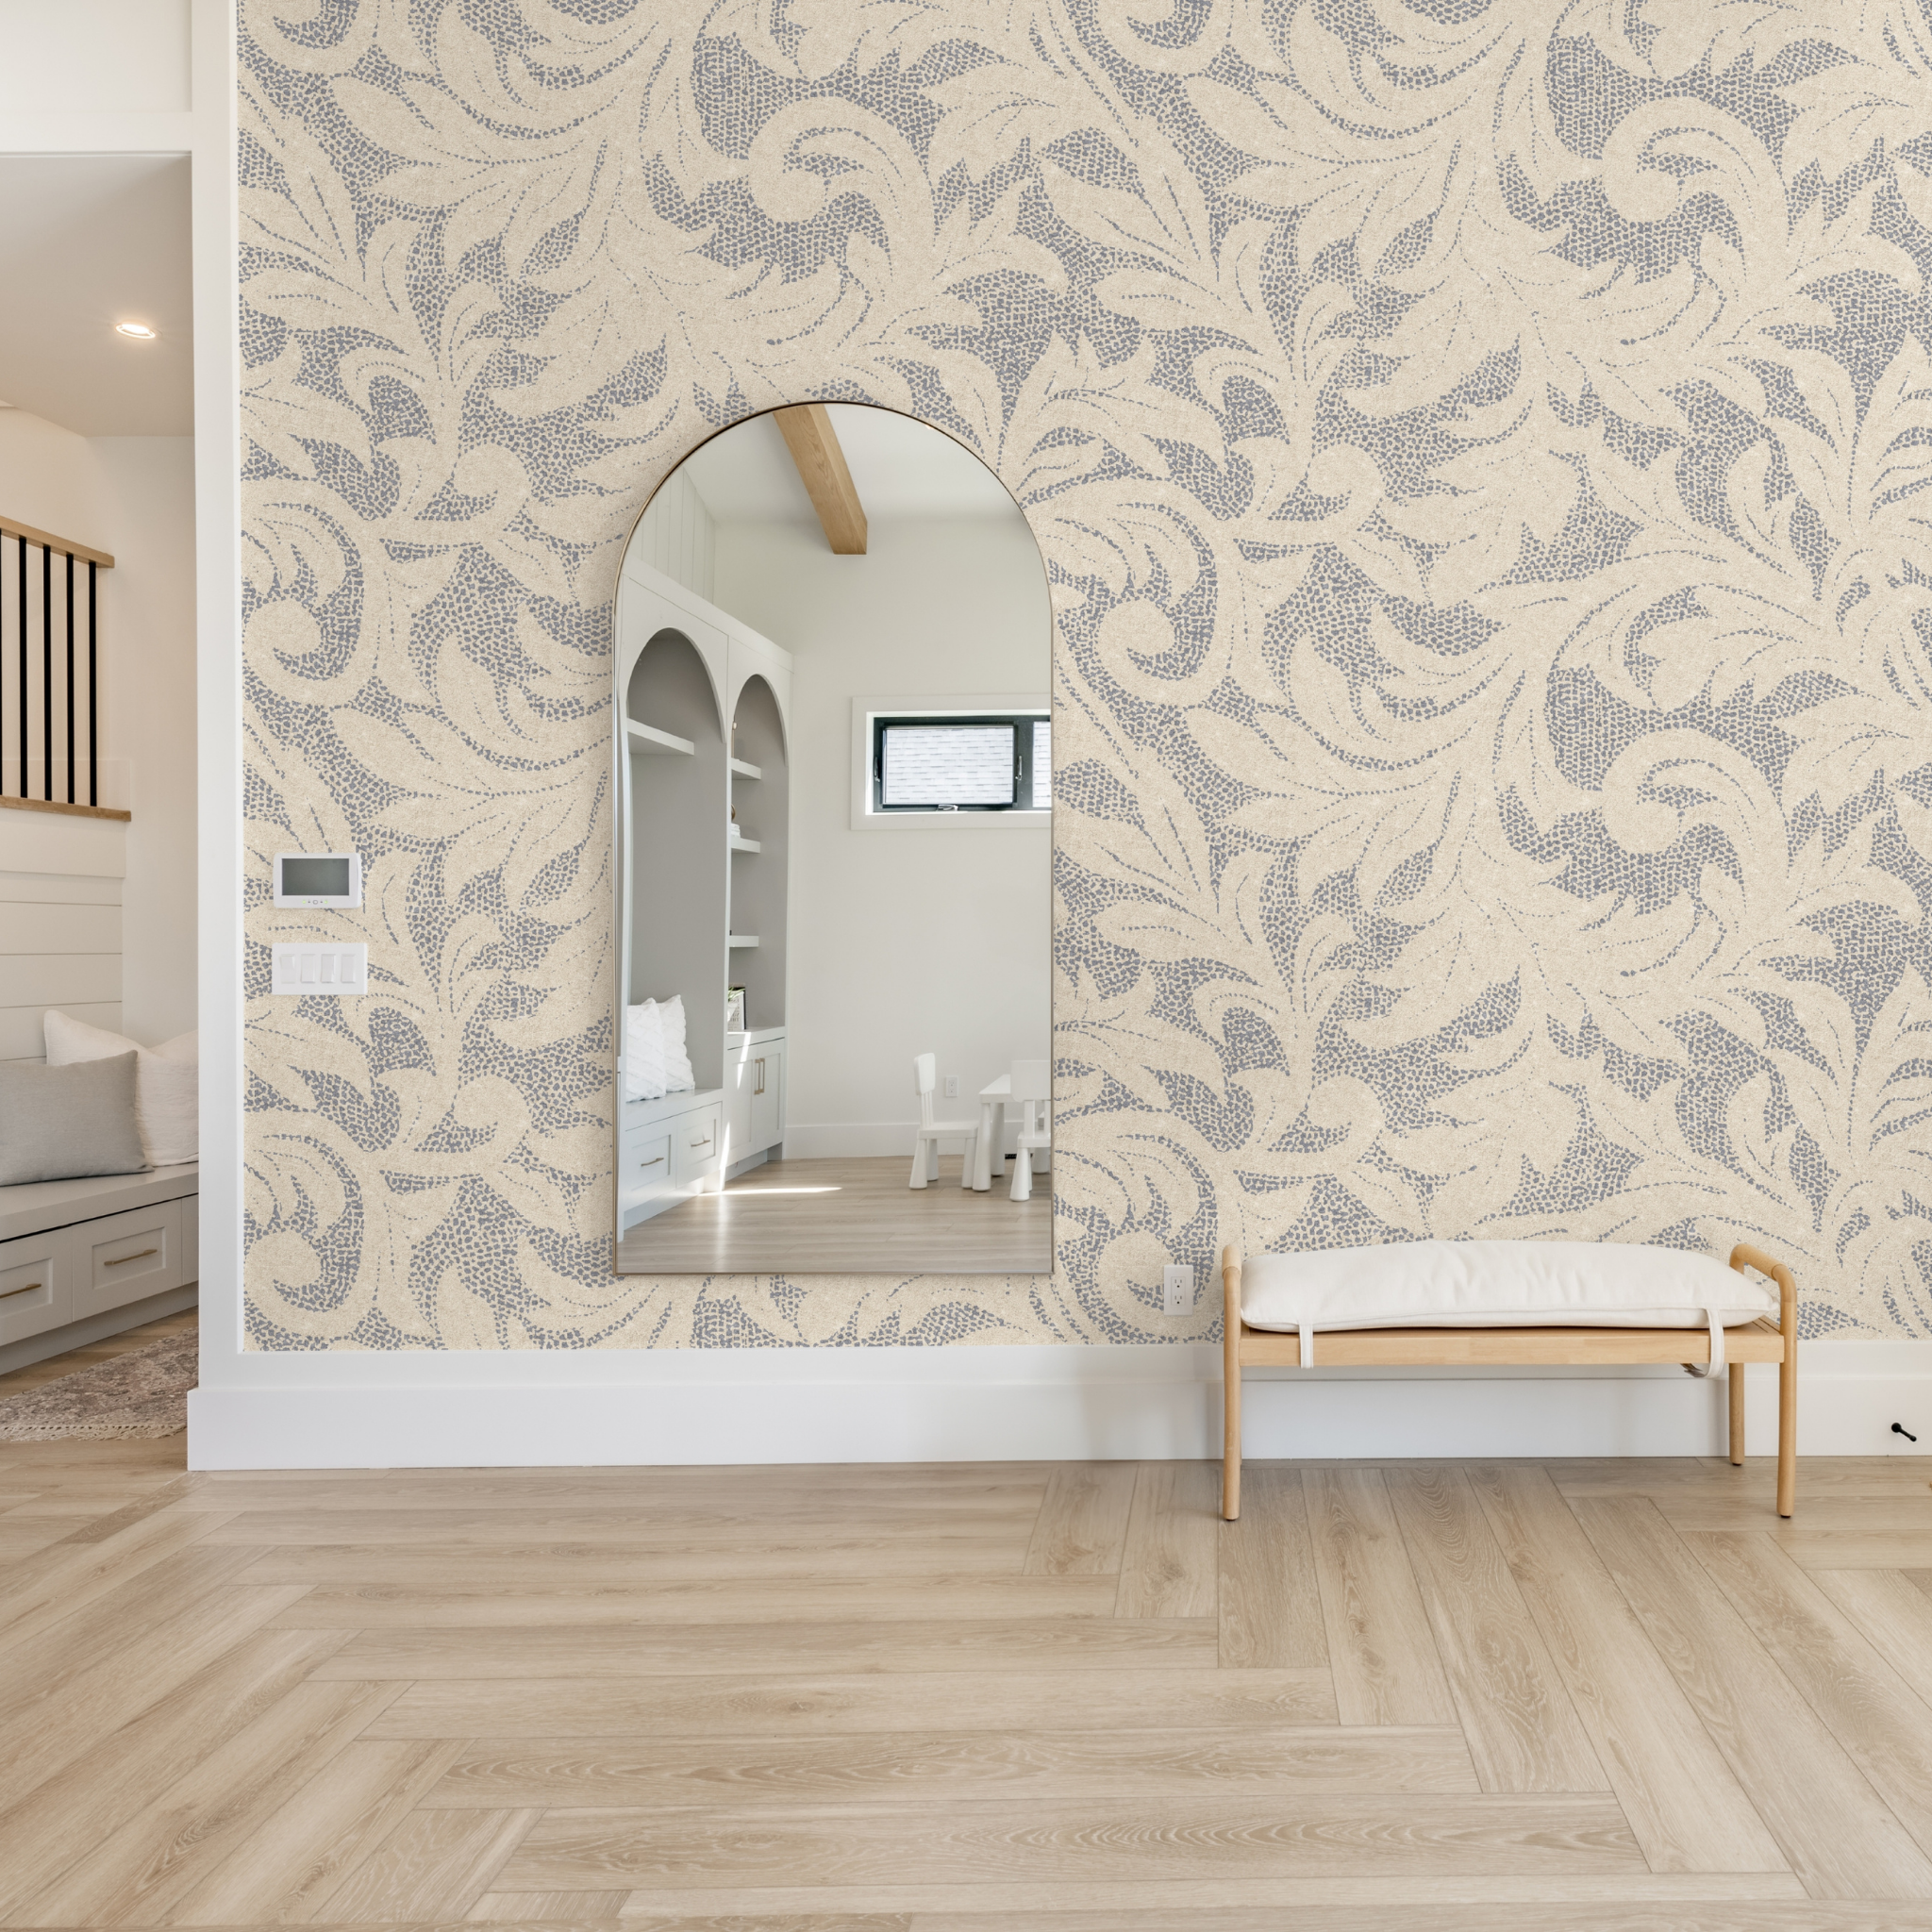 "Esme Wallpaper by Wall Blush in a stylish bedroom showcasing elegant patterns as the main feature."